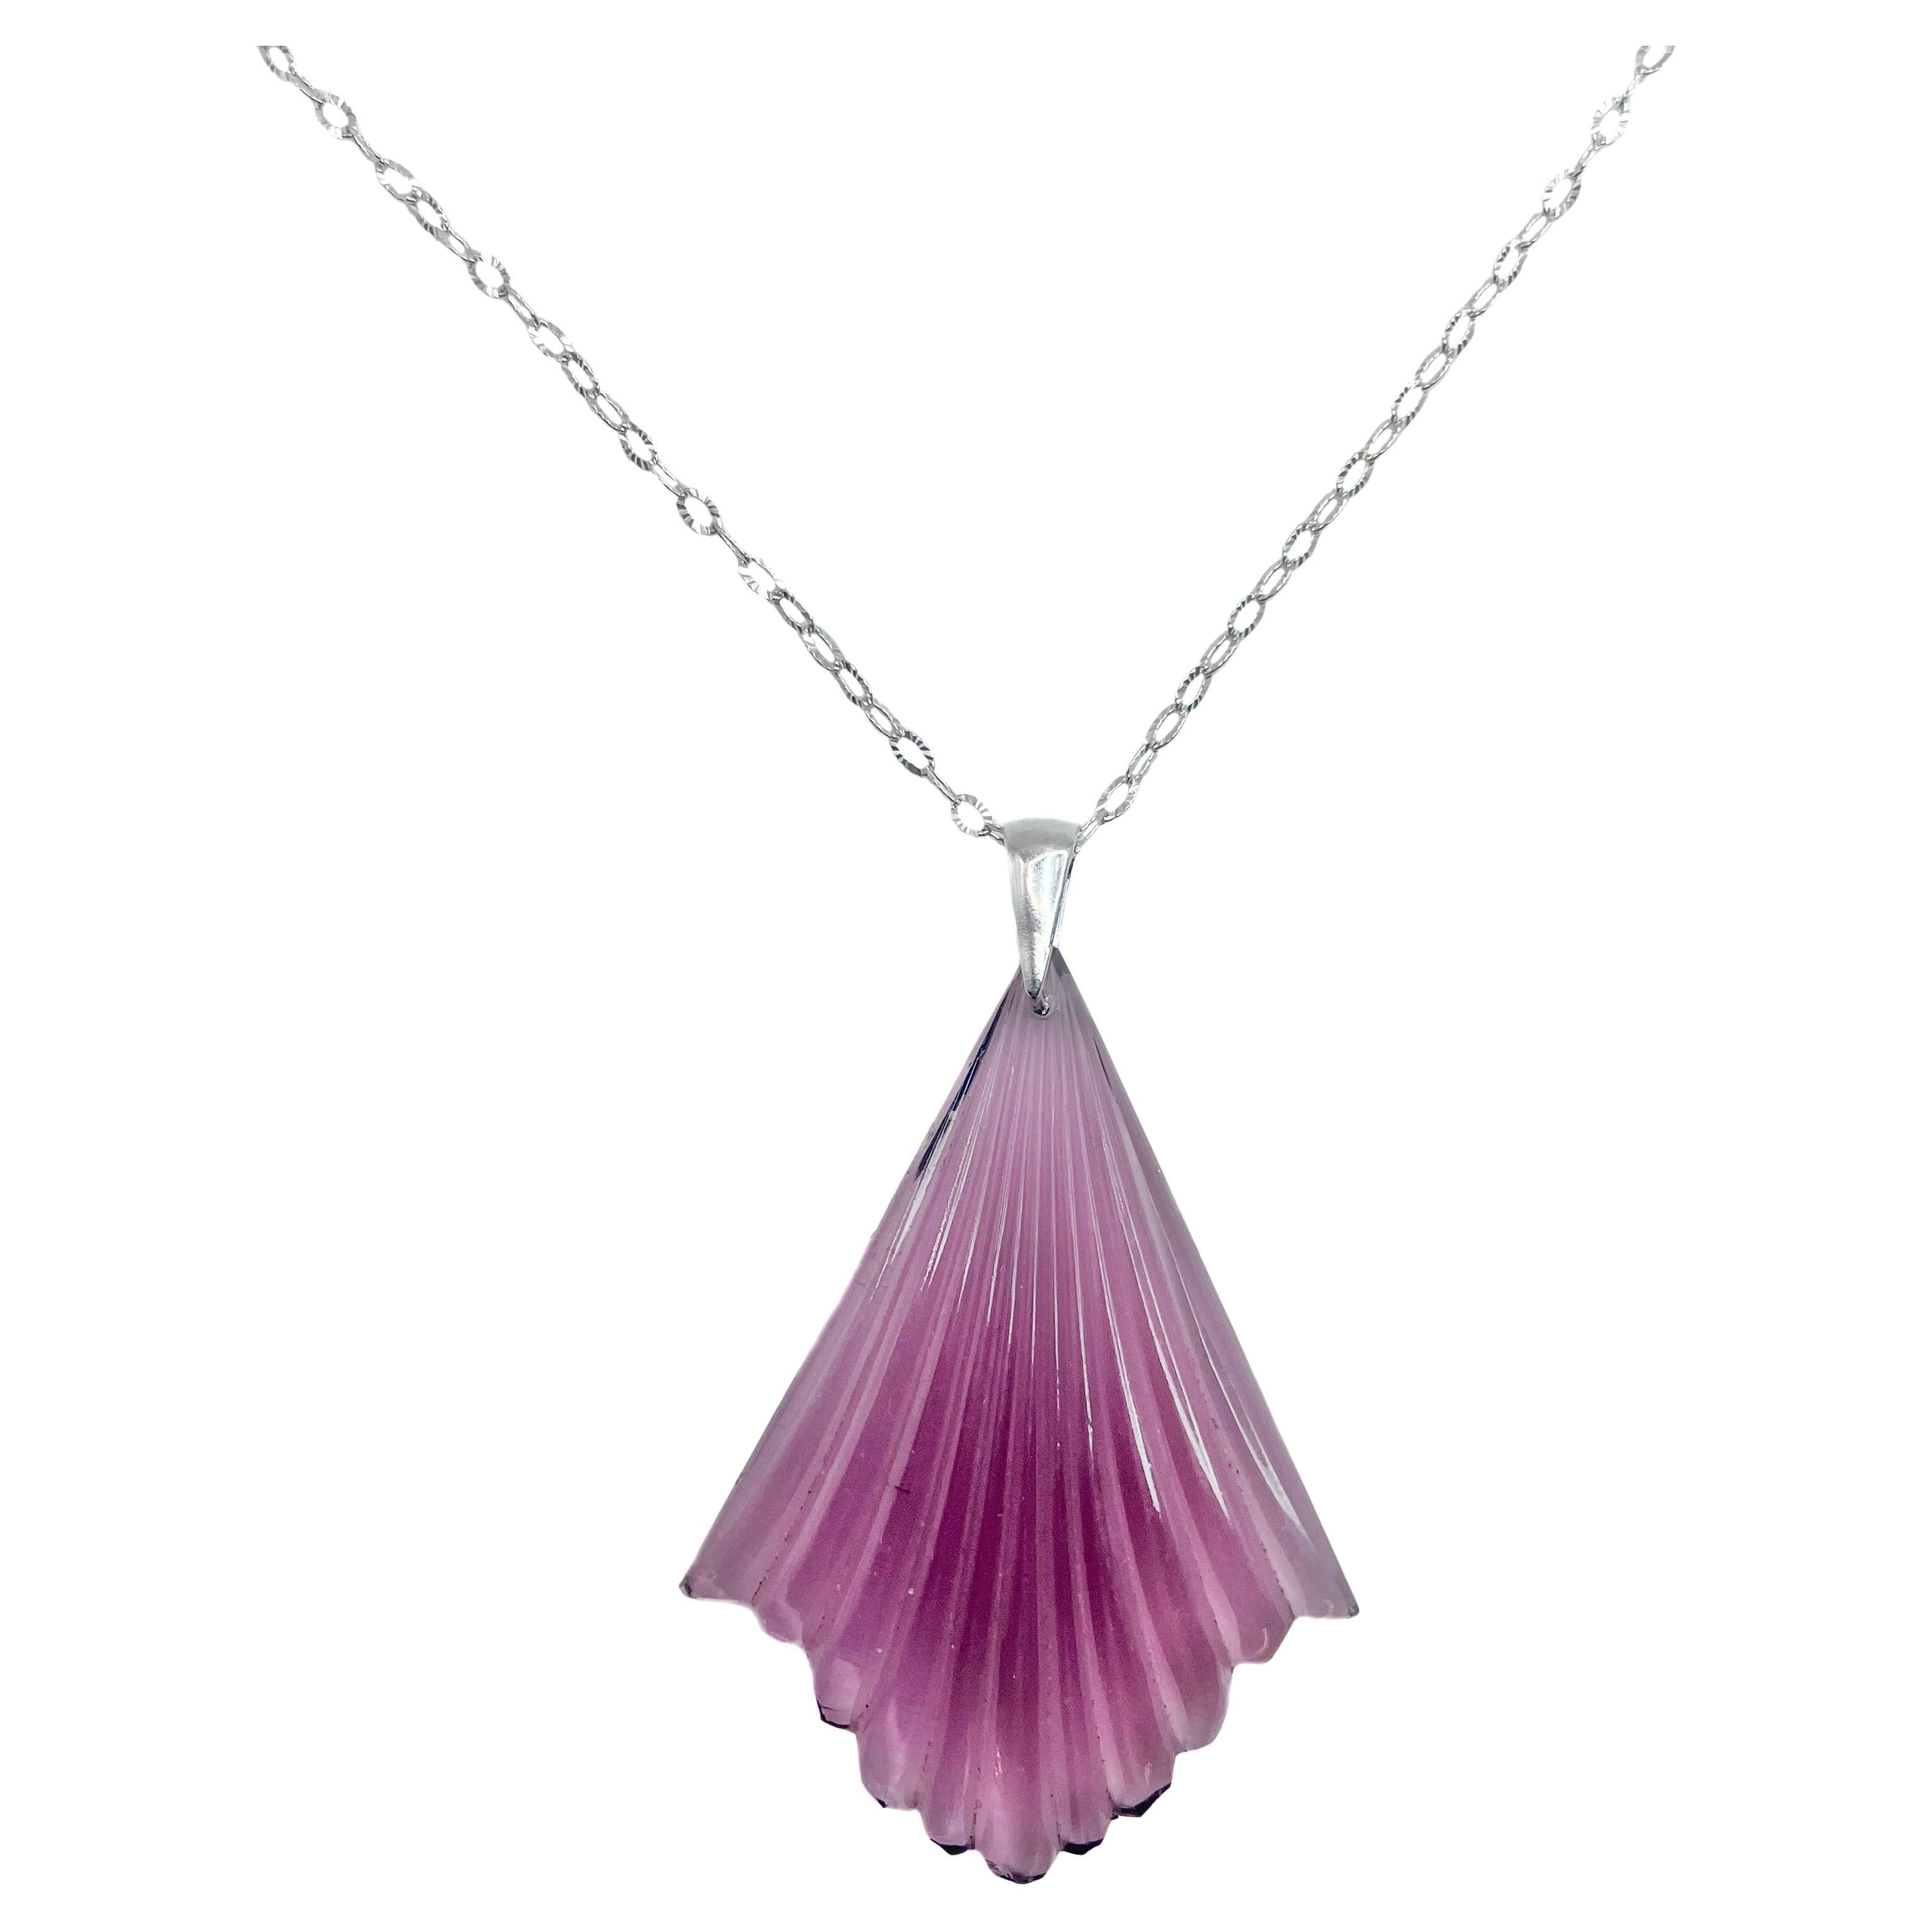 PONTIEL Art Deco Amethyst Glass Fan with Sterling Silver Chain Pendant Necklace For Sale